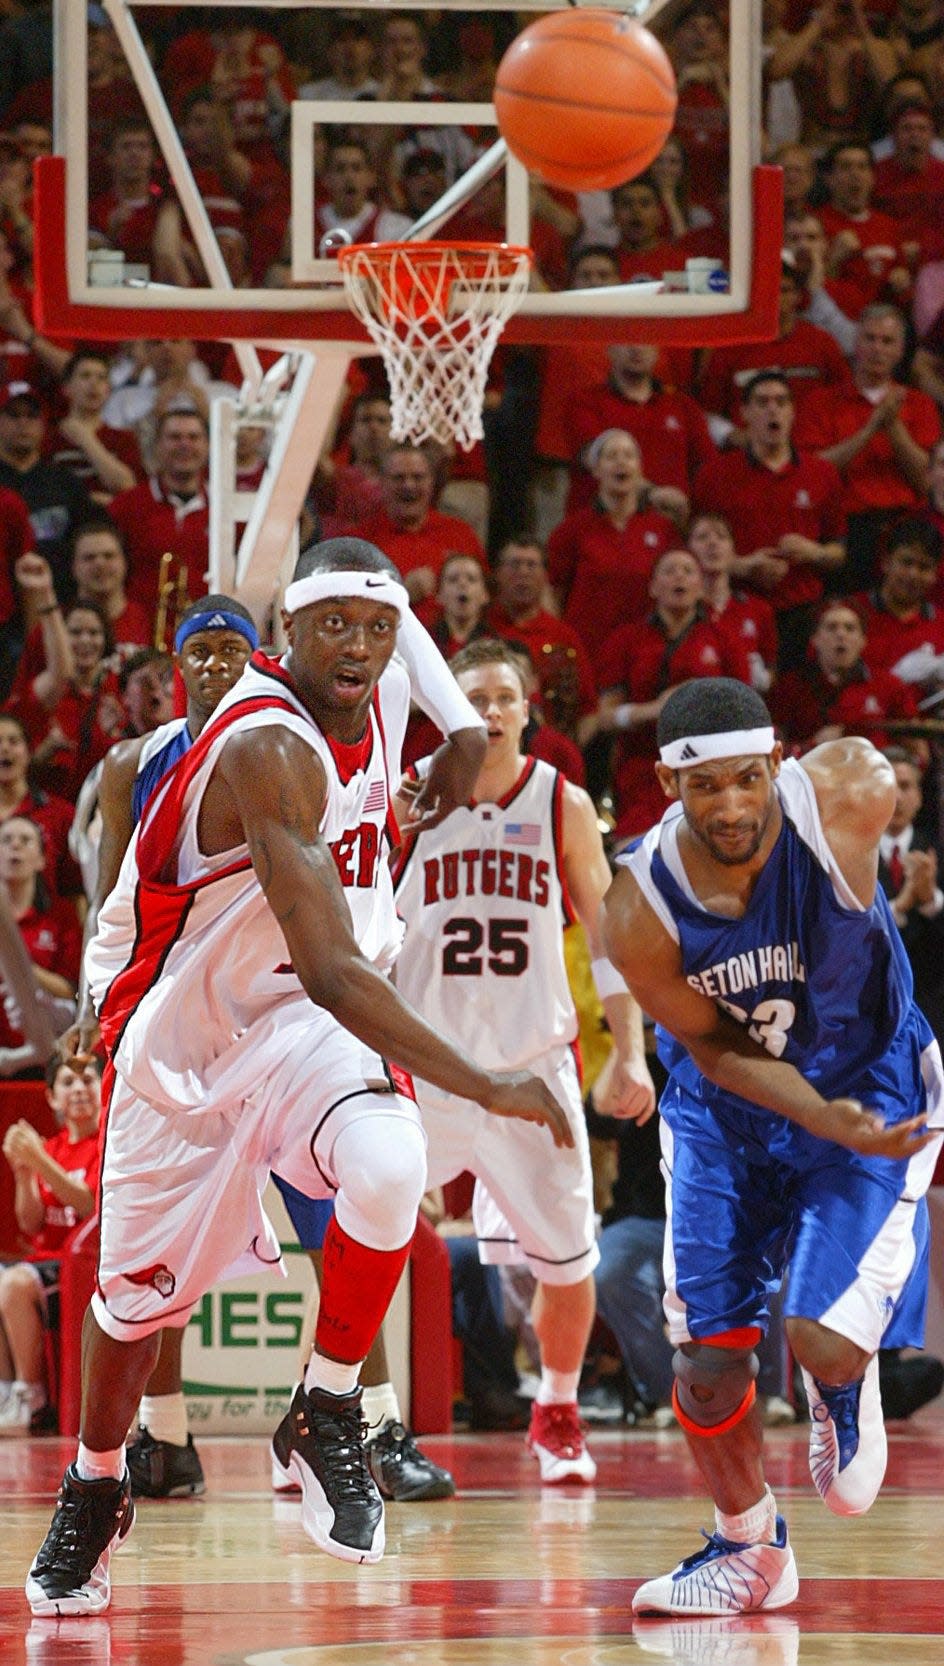 Rutgers' Herve Lamizana, and Seton Hall's Damion Fray chase a loose ball in the 2004 classic at the RAC.